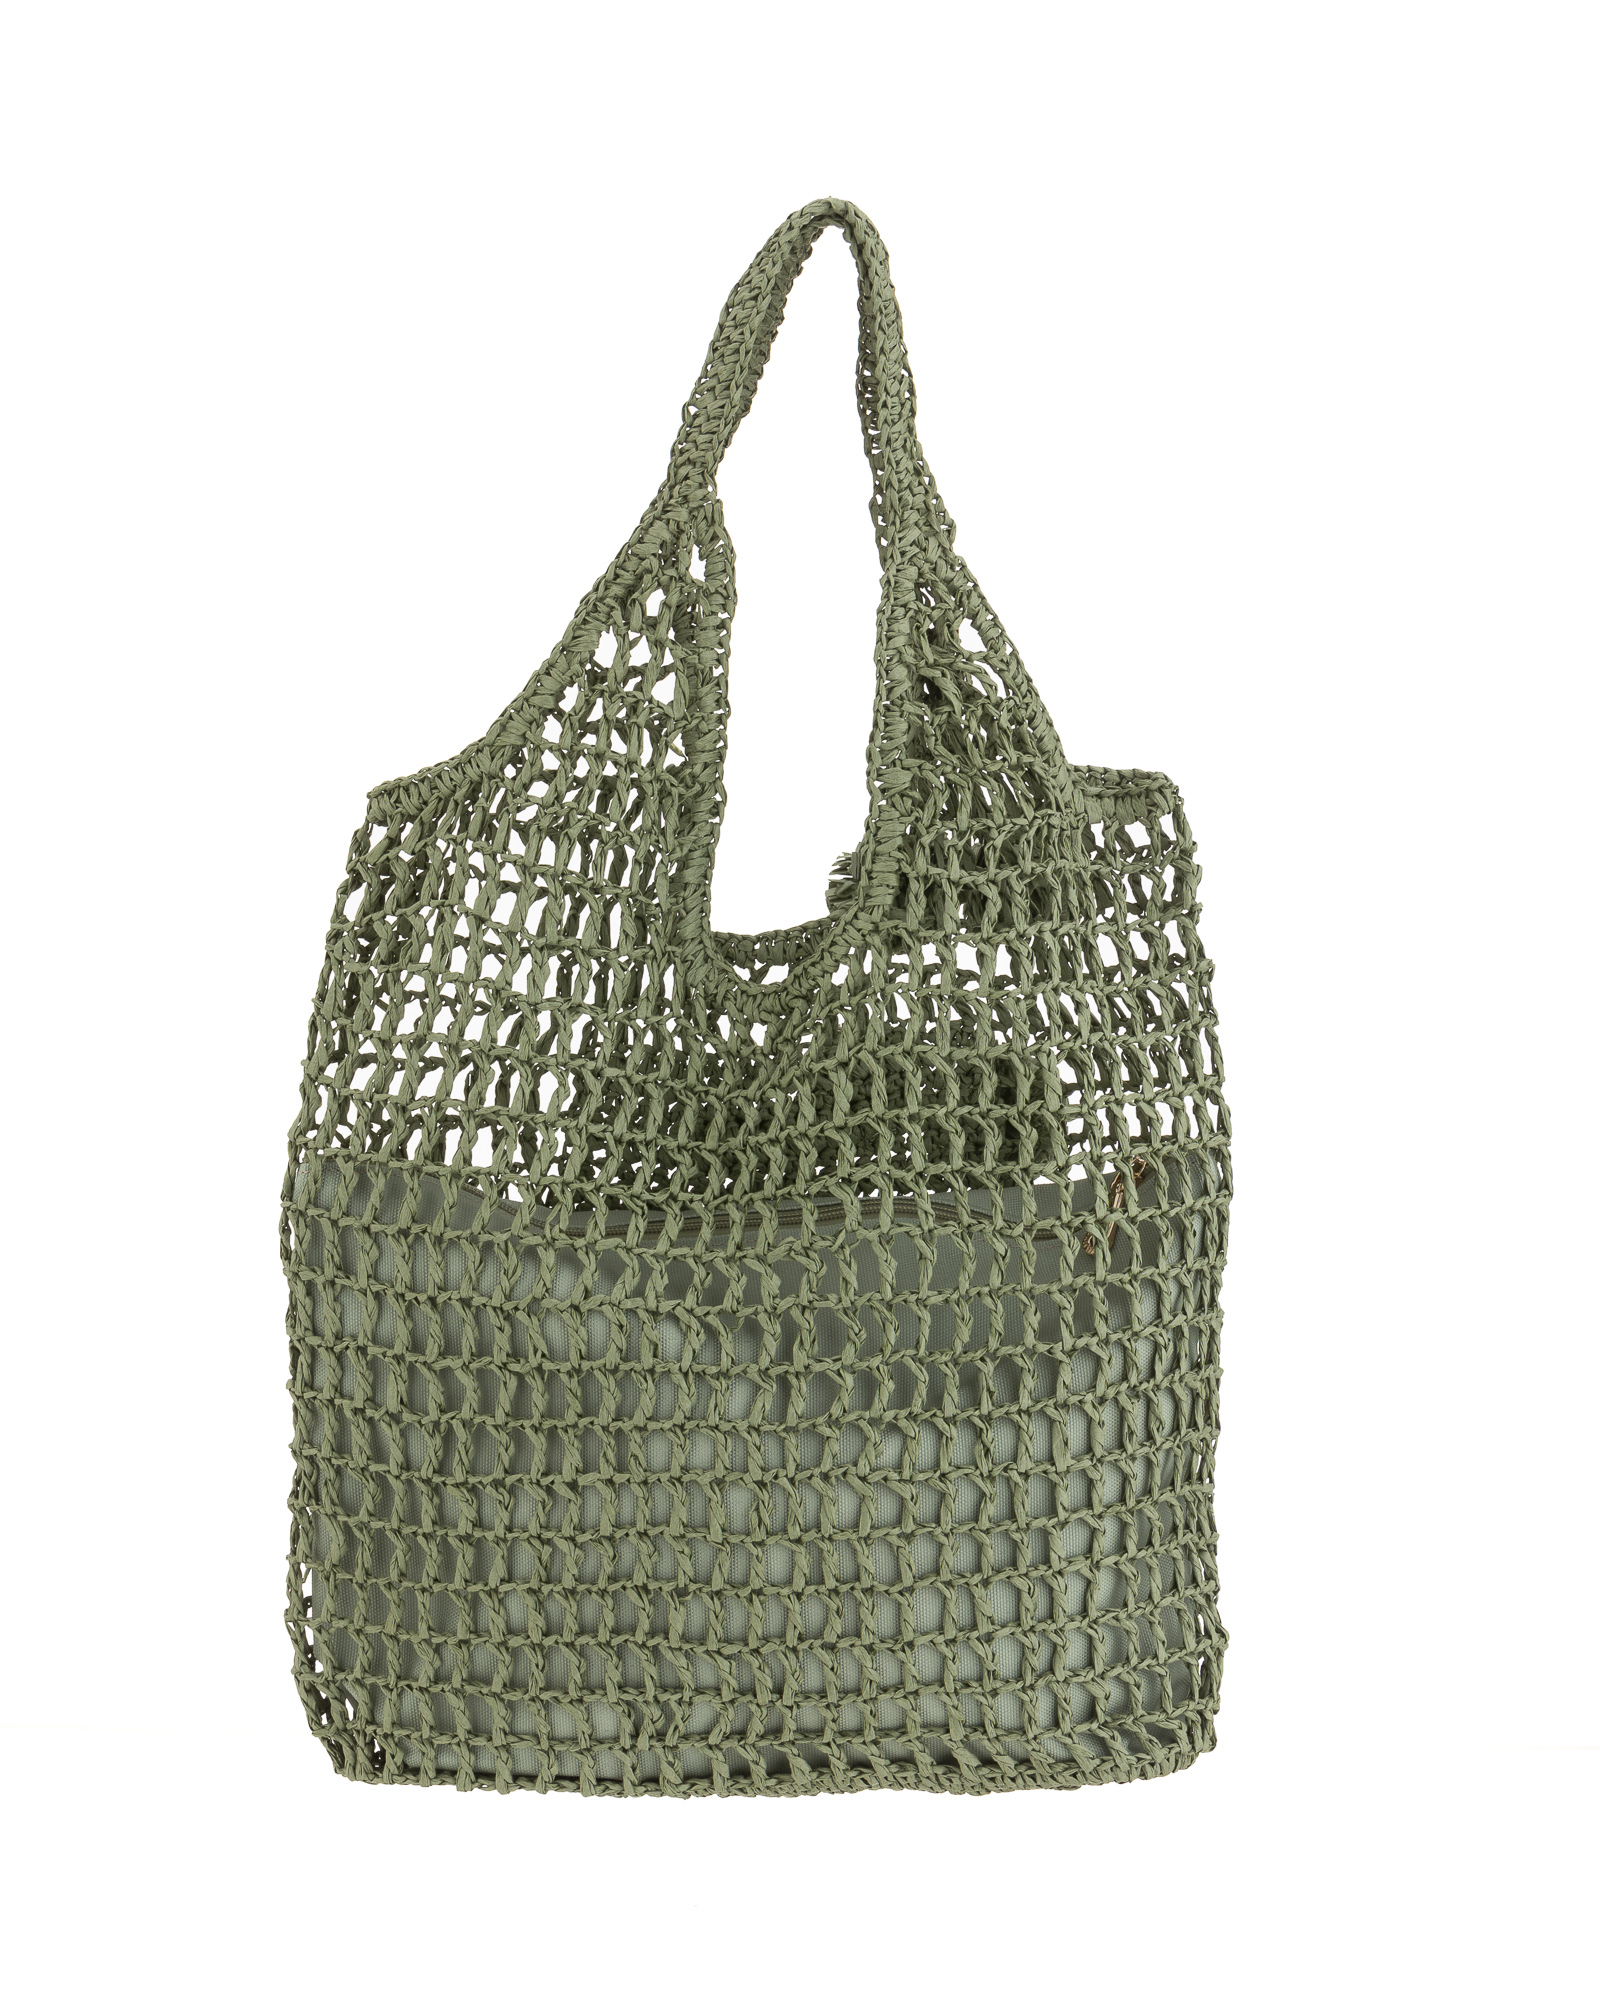 BAG MILITARY - STYLE8200